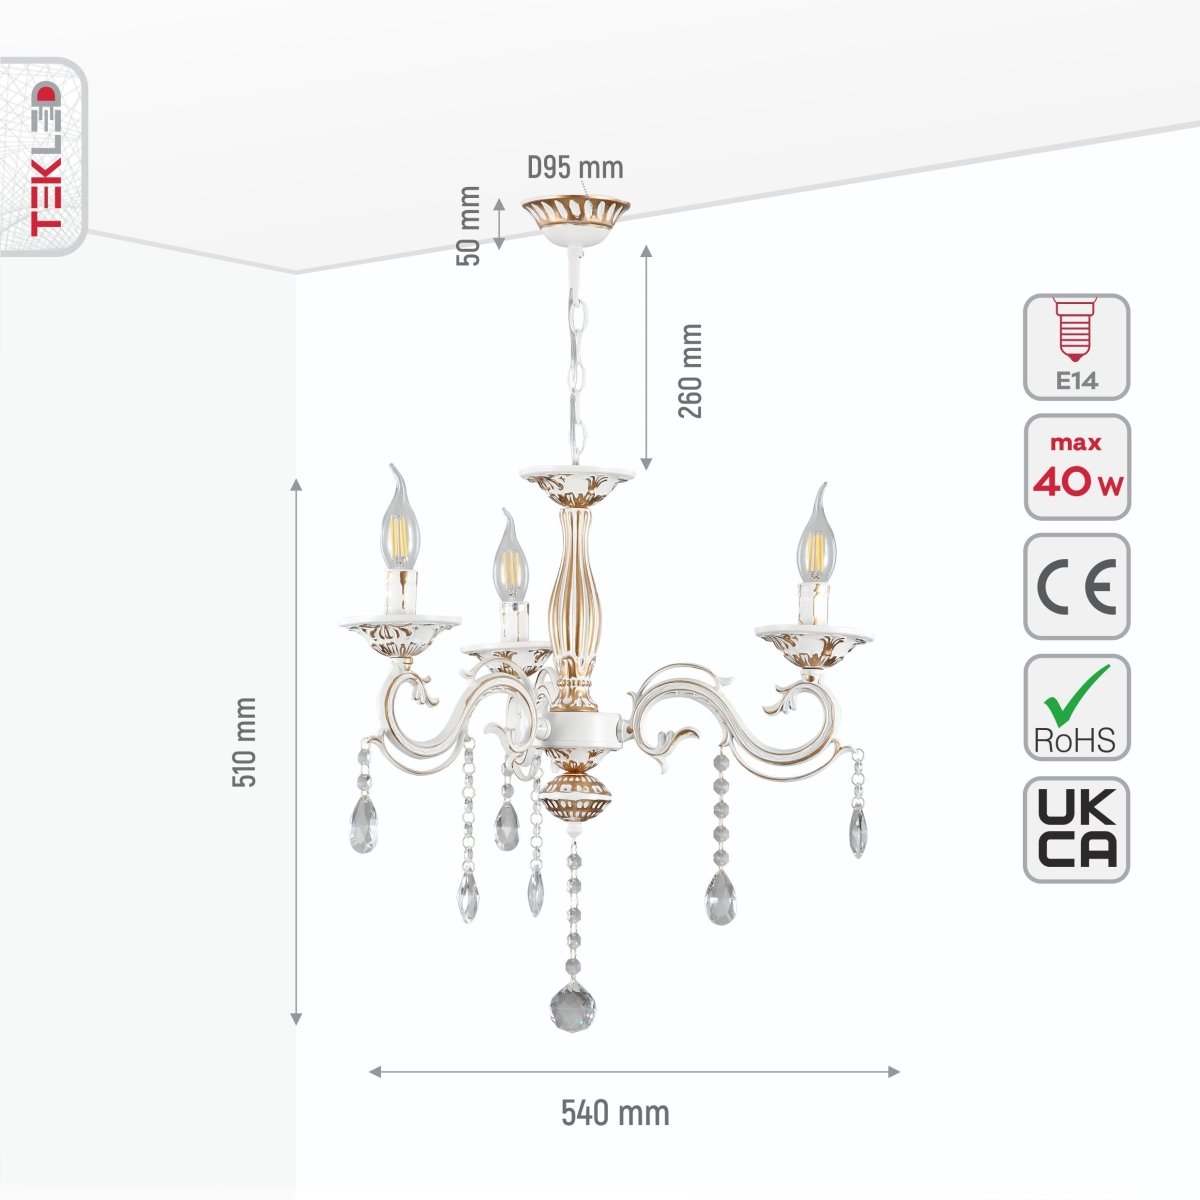 Size and specs of 3 Arm Chandelier Metal and Crystal Gold Aged Cream 3xE14 | TEKLED 159-17828